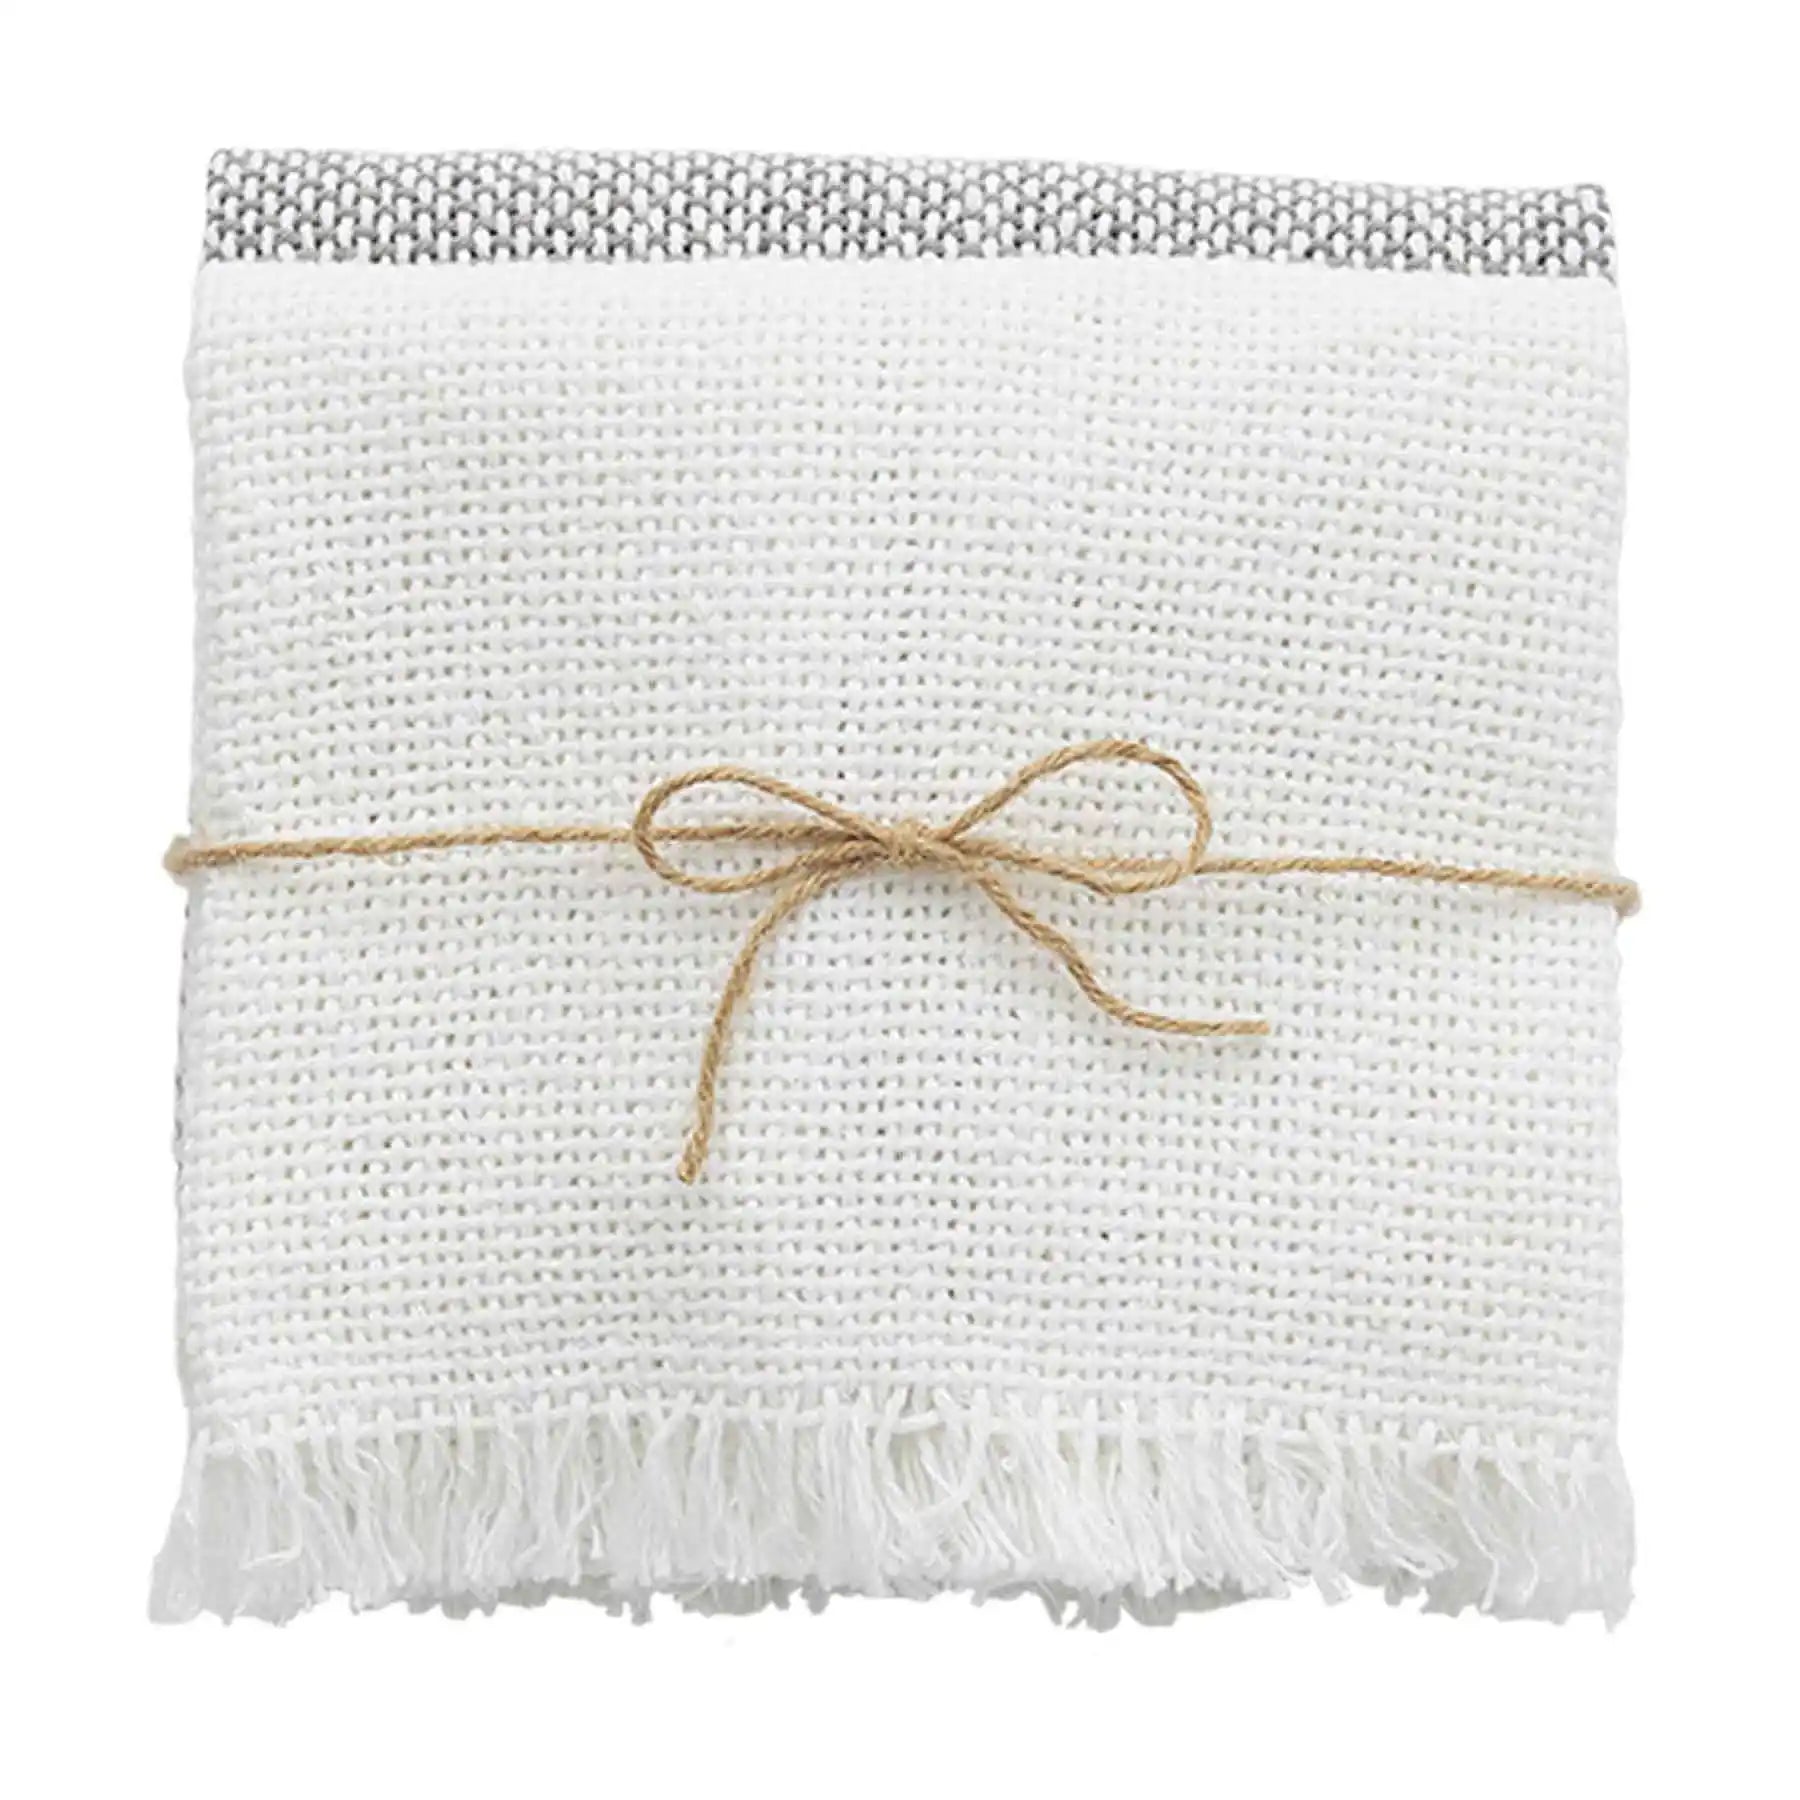 Mud pie white woven hand towels